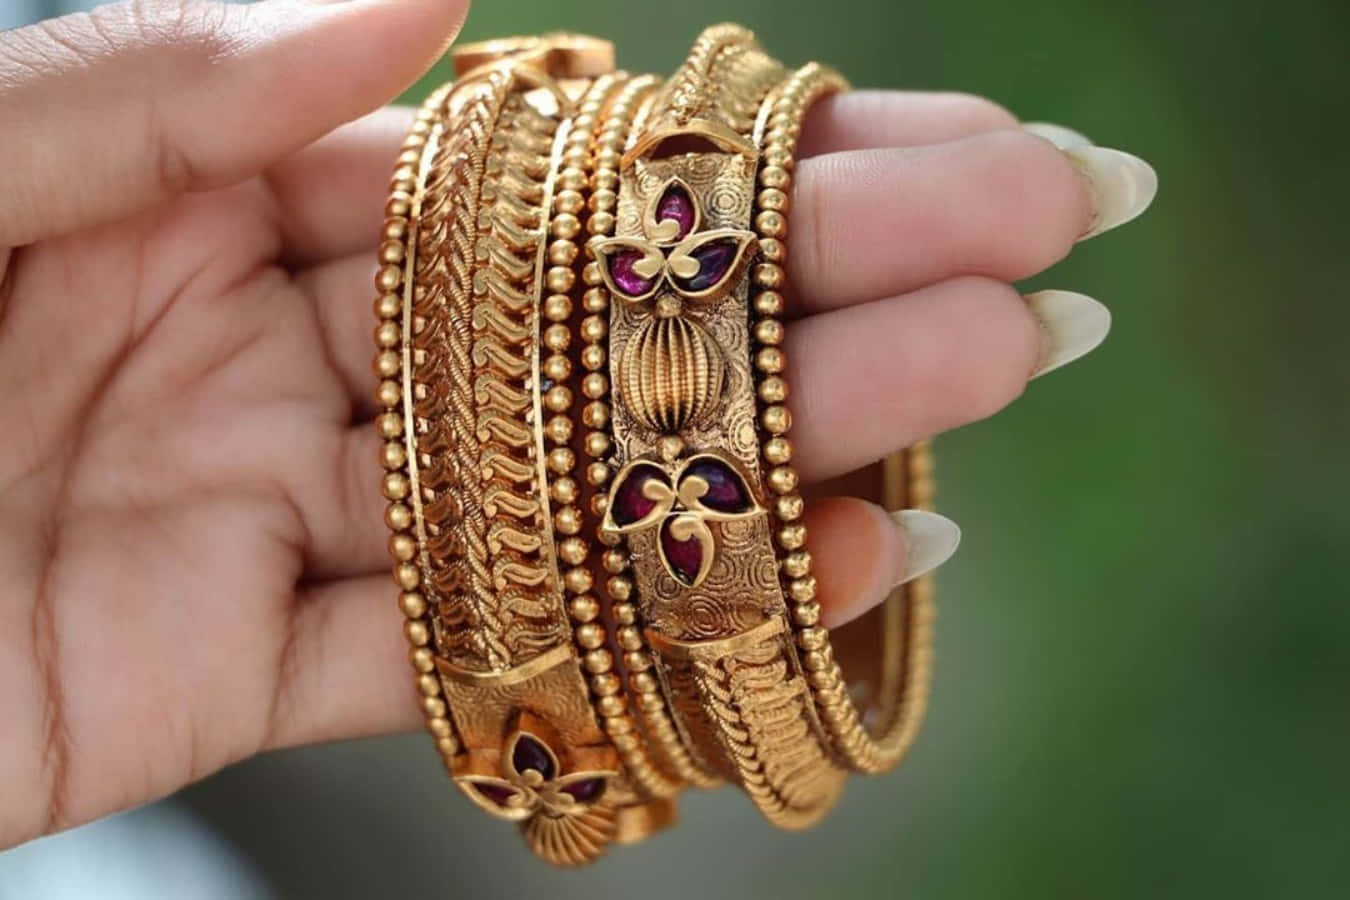 A beautiful collection of intricate, colorful bangles.